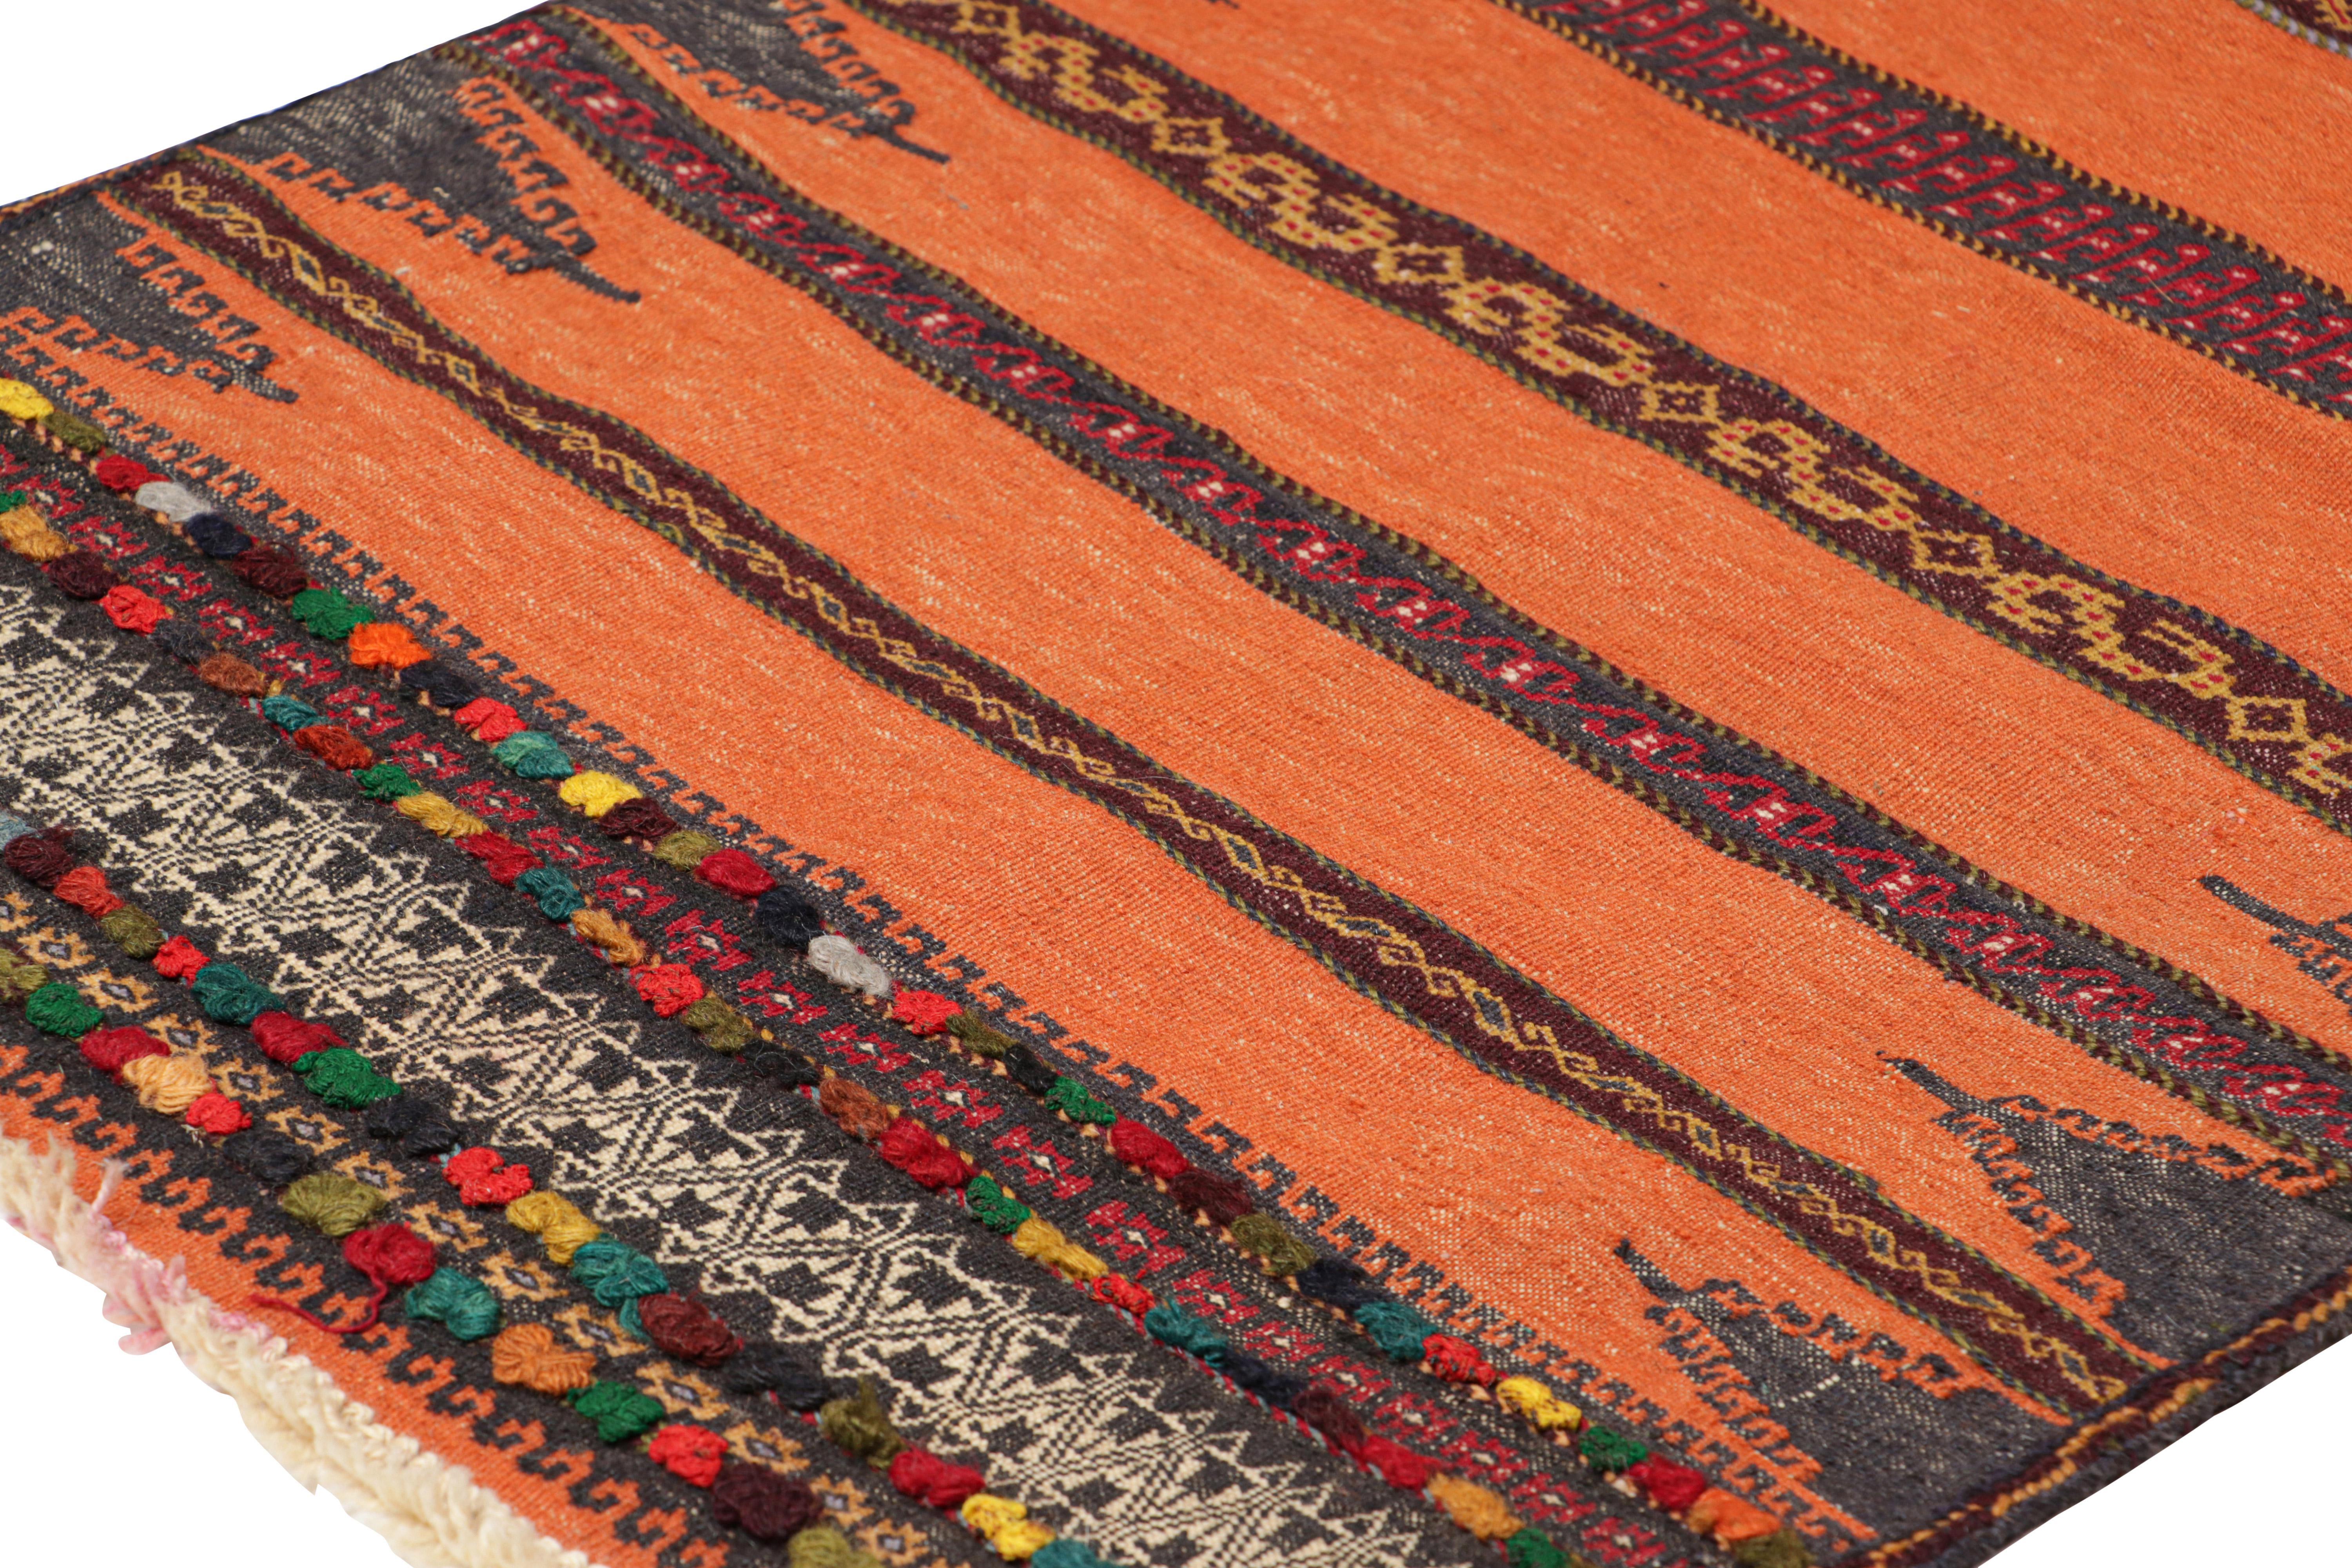 Hand-Woven Vintage Afghan Kilim in Orange with Geometric Stripes, from Rug & Kilim For Sale